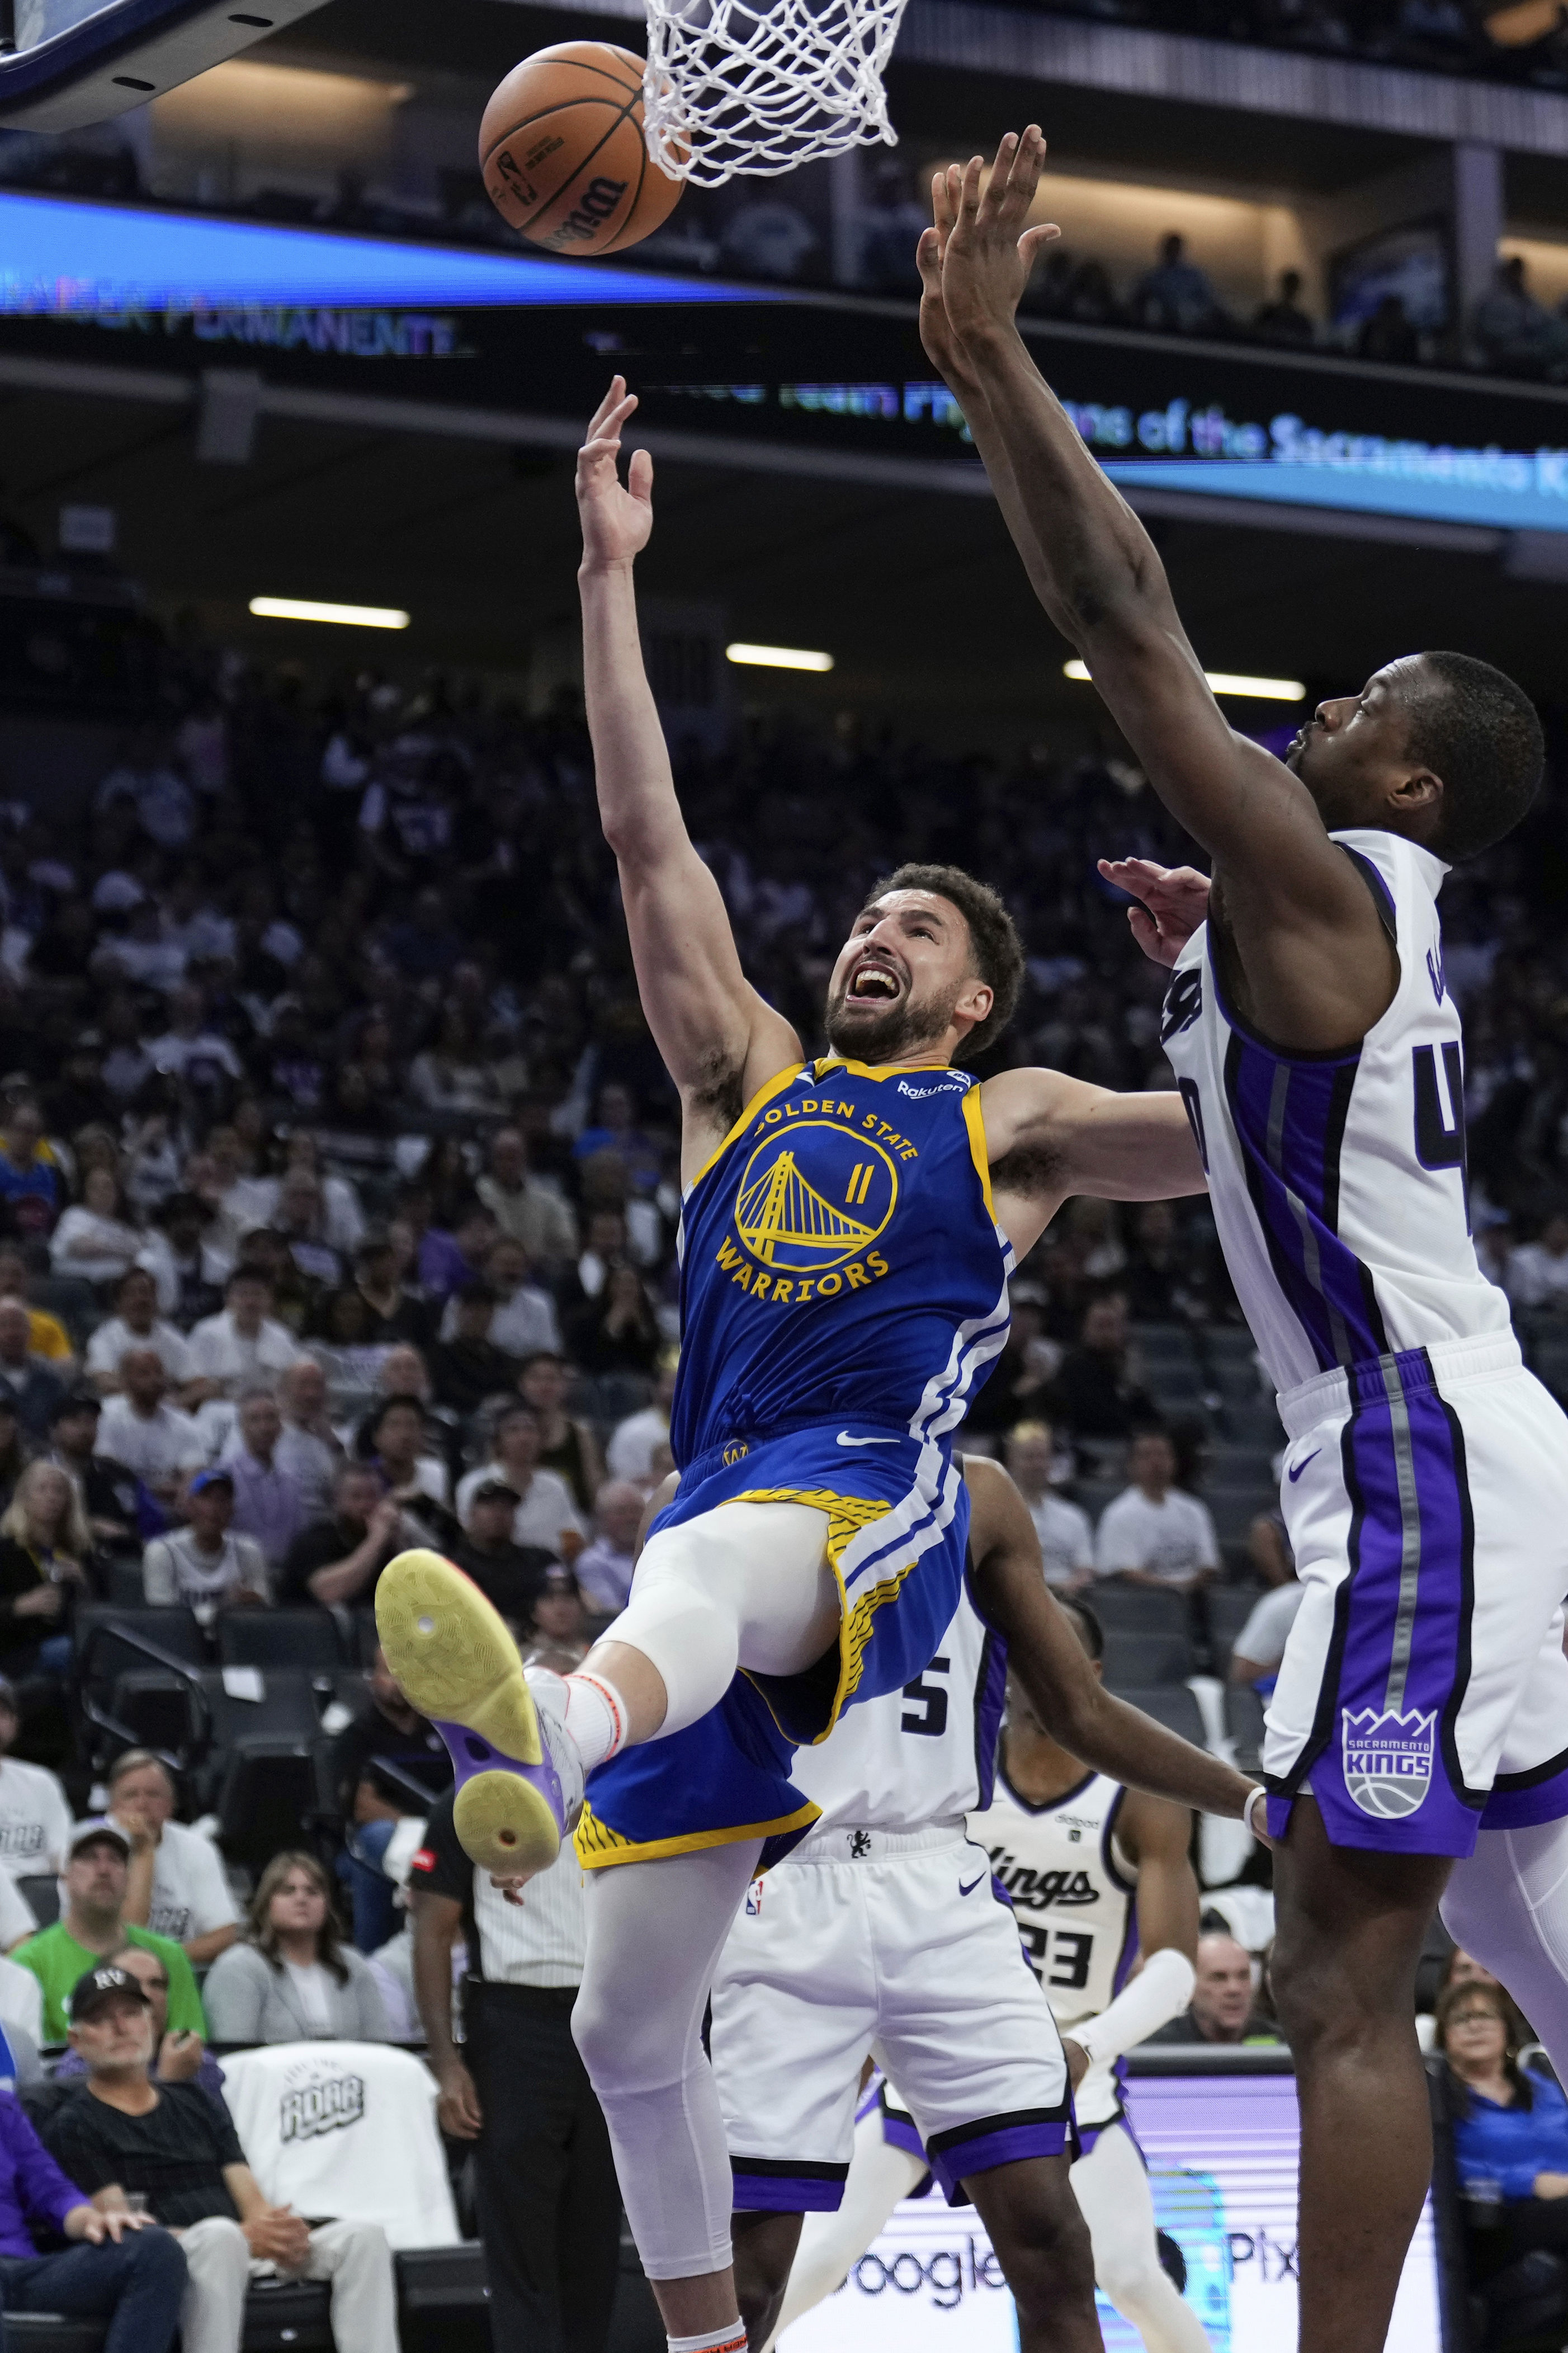 the kings eliminate the warriors from play-in tournament with 118-94 win